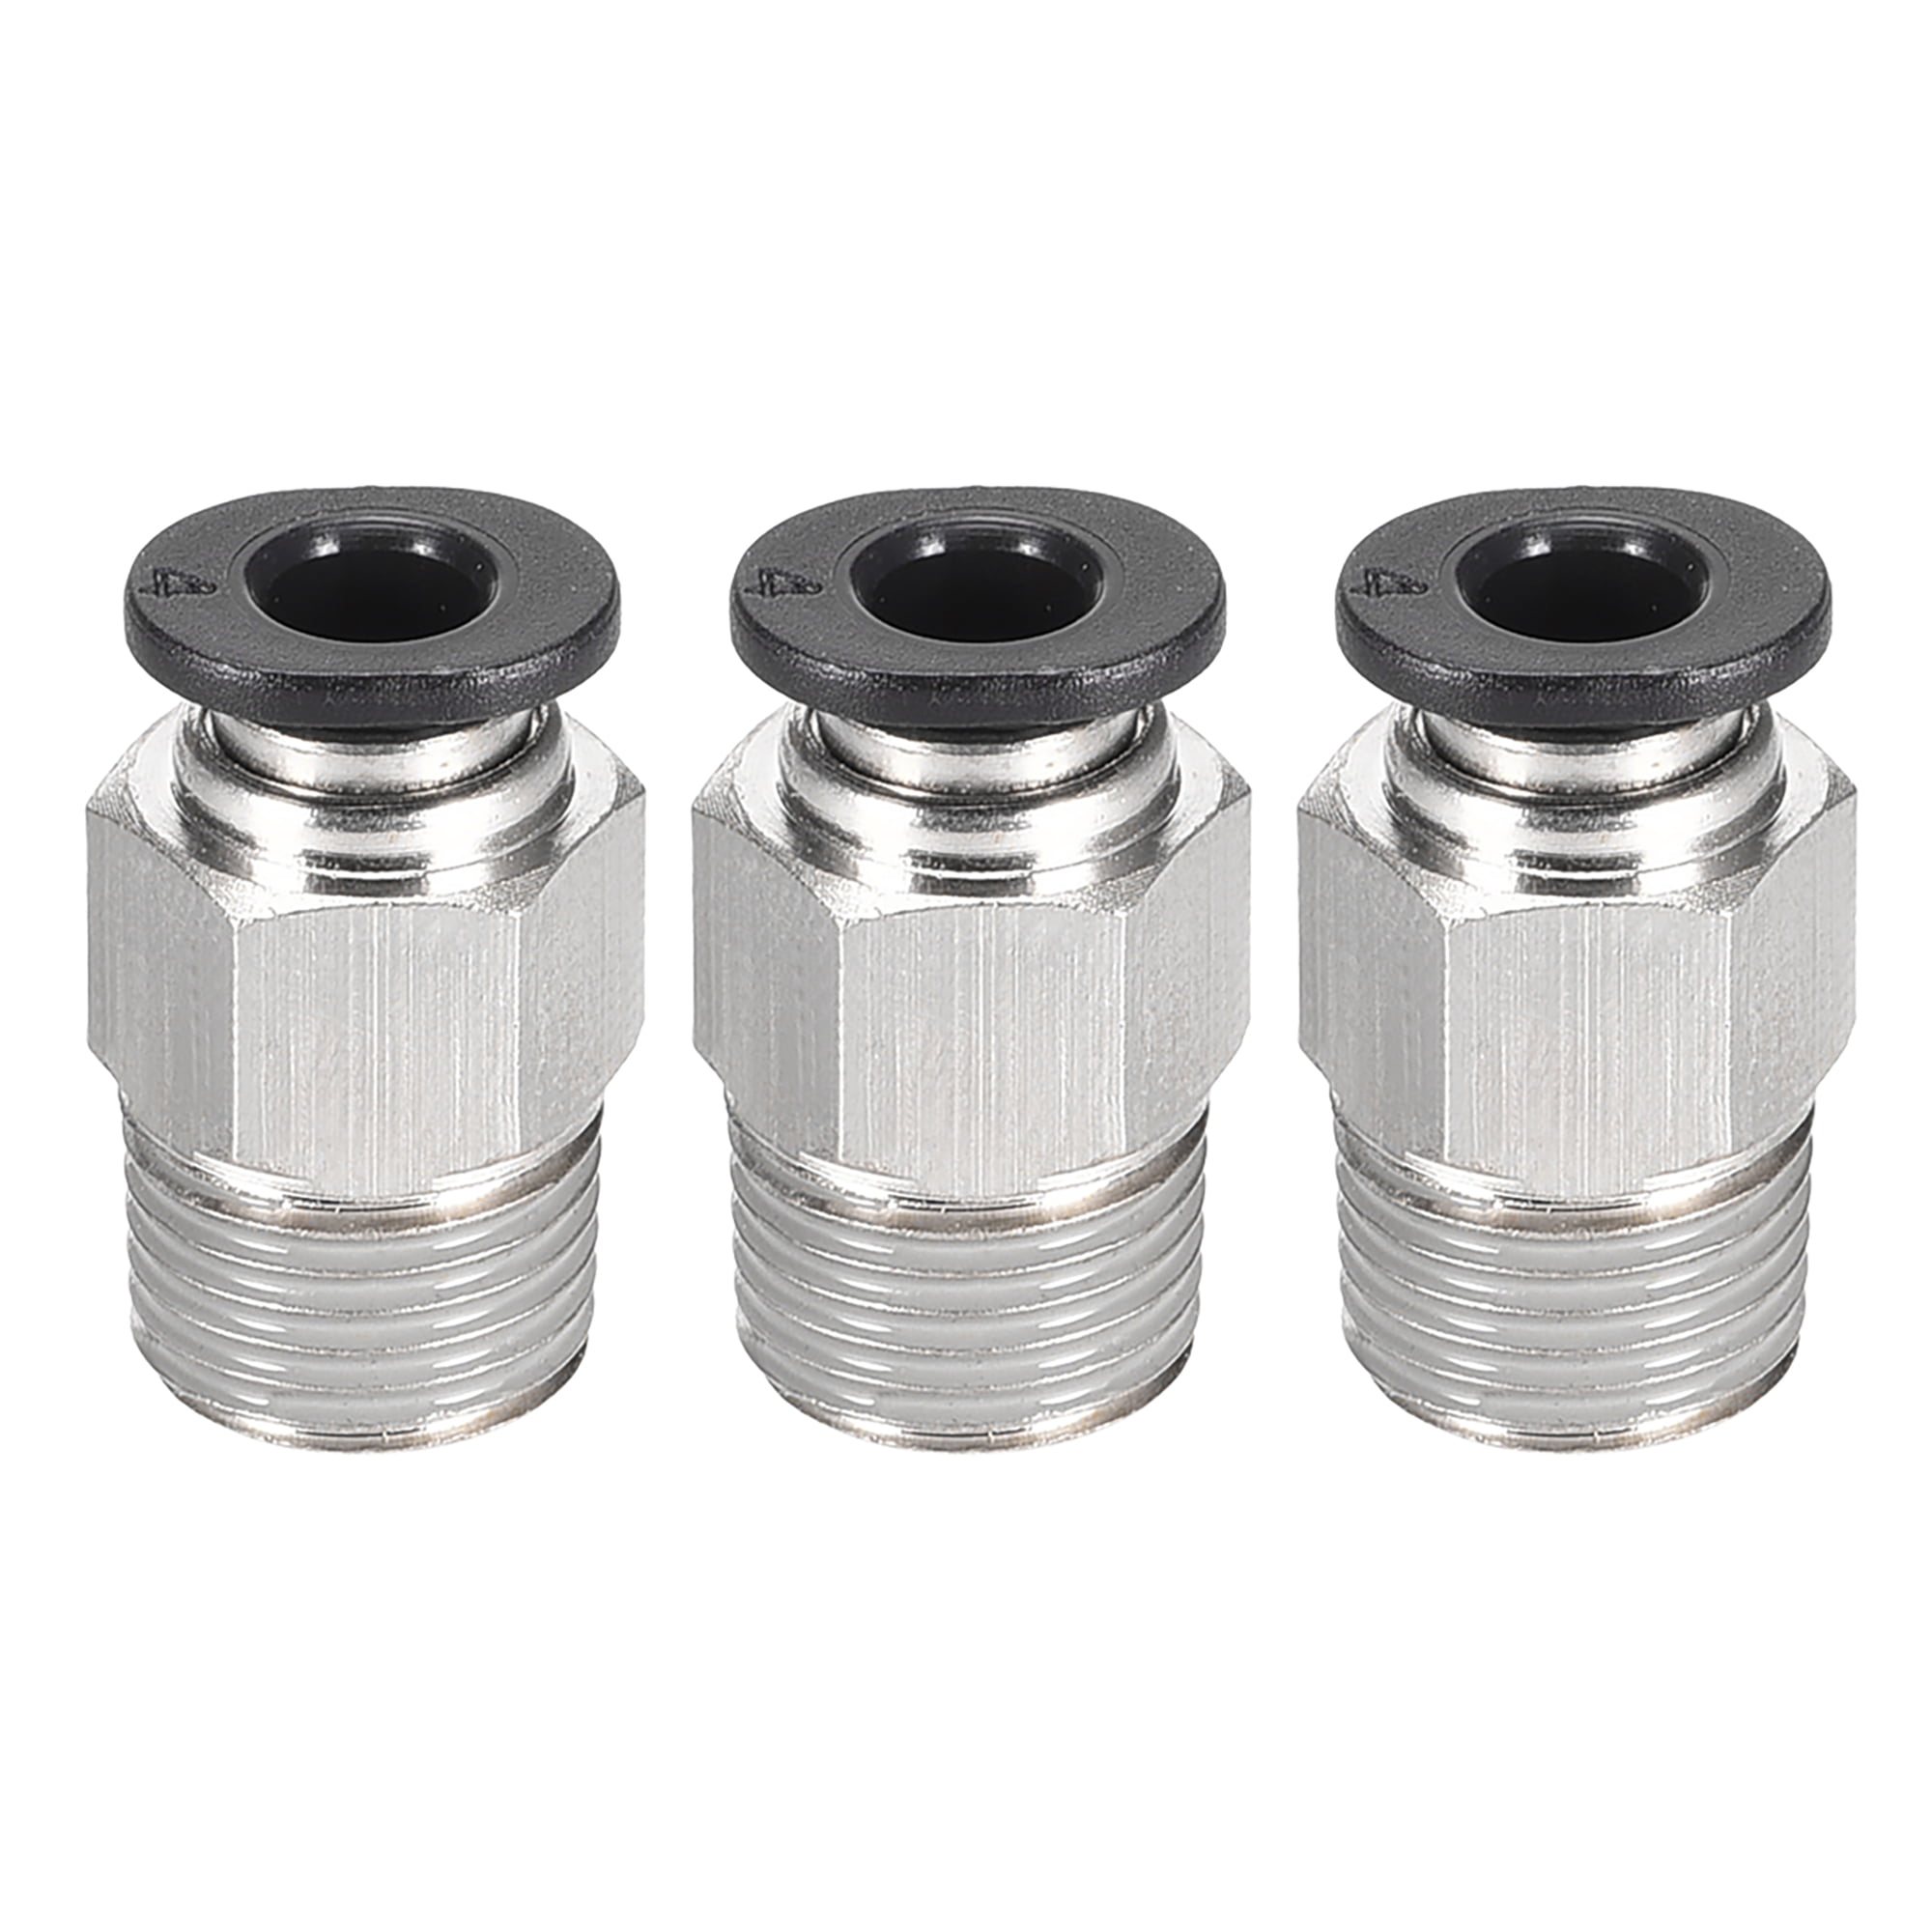 uxcell Straight Pneumatic Push to Quick Connect Fittings G3/8 Male x 14mm Tube OD 4pcs